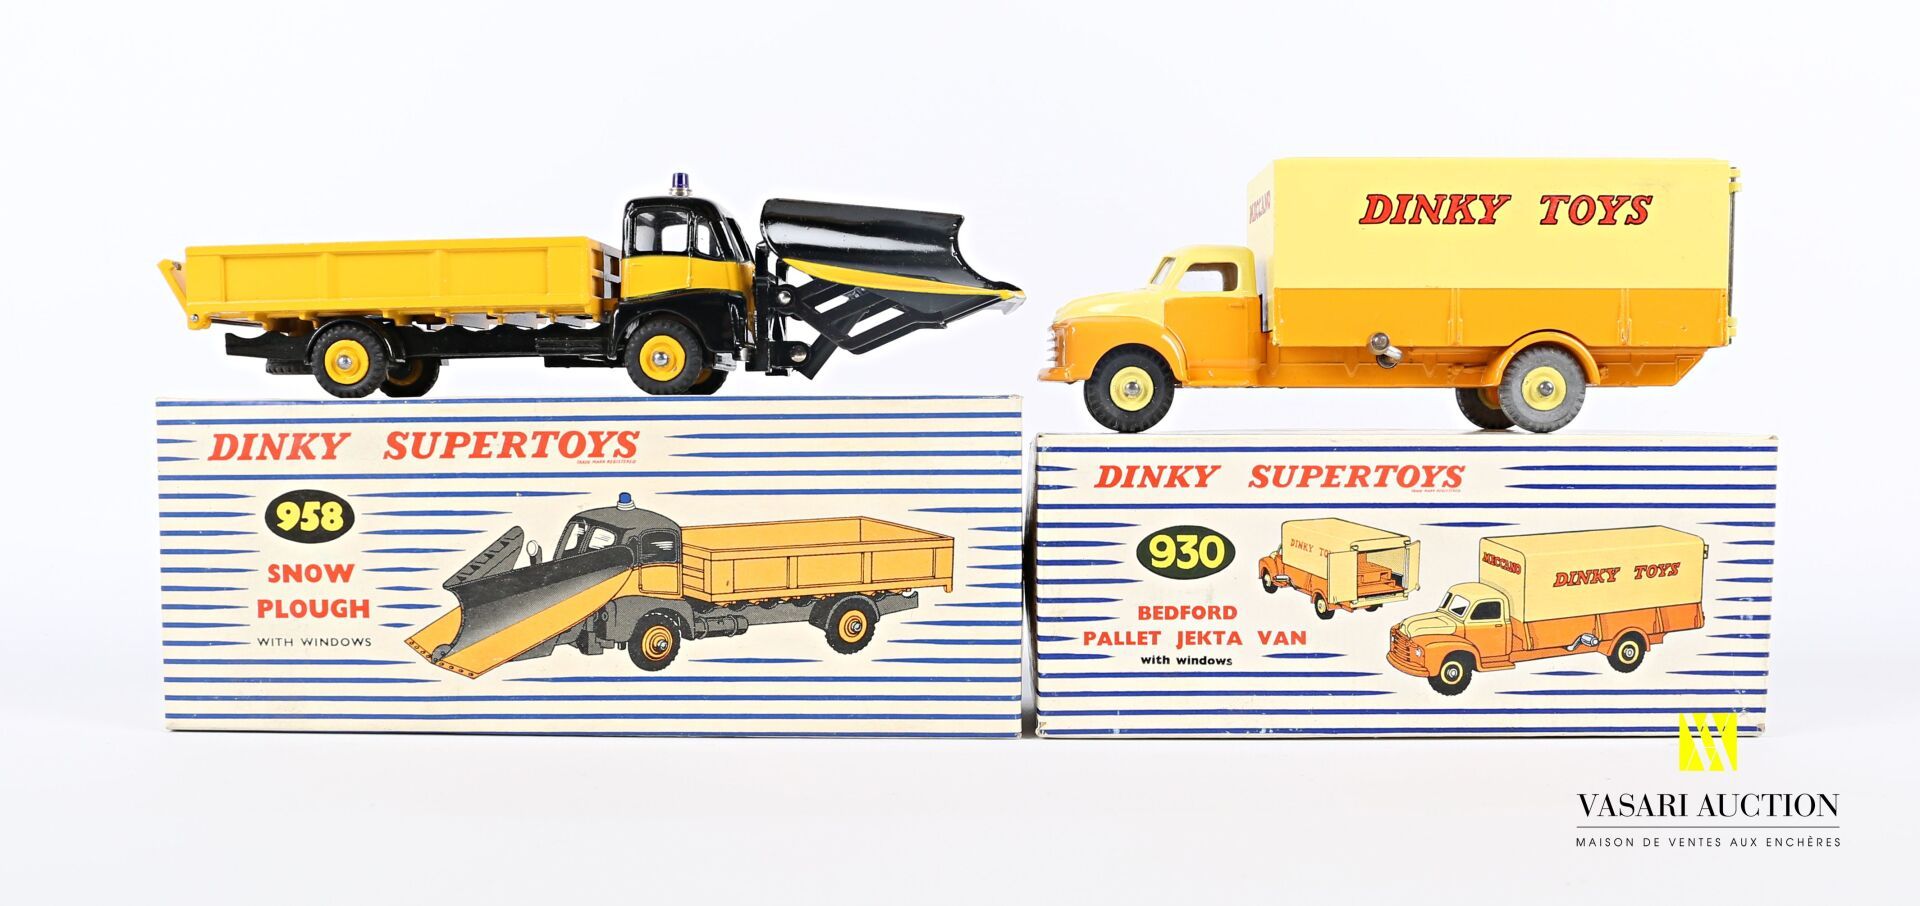 Null DINKY SUPERTOYS (GB MECCANO)

Snowplow 958

Bedford truck "Dinky Toys" 930
&hellip;